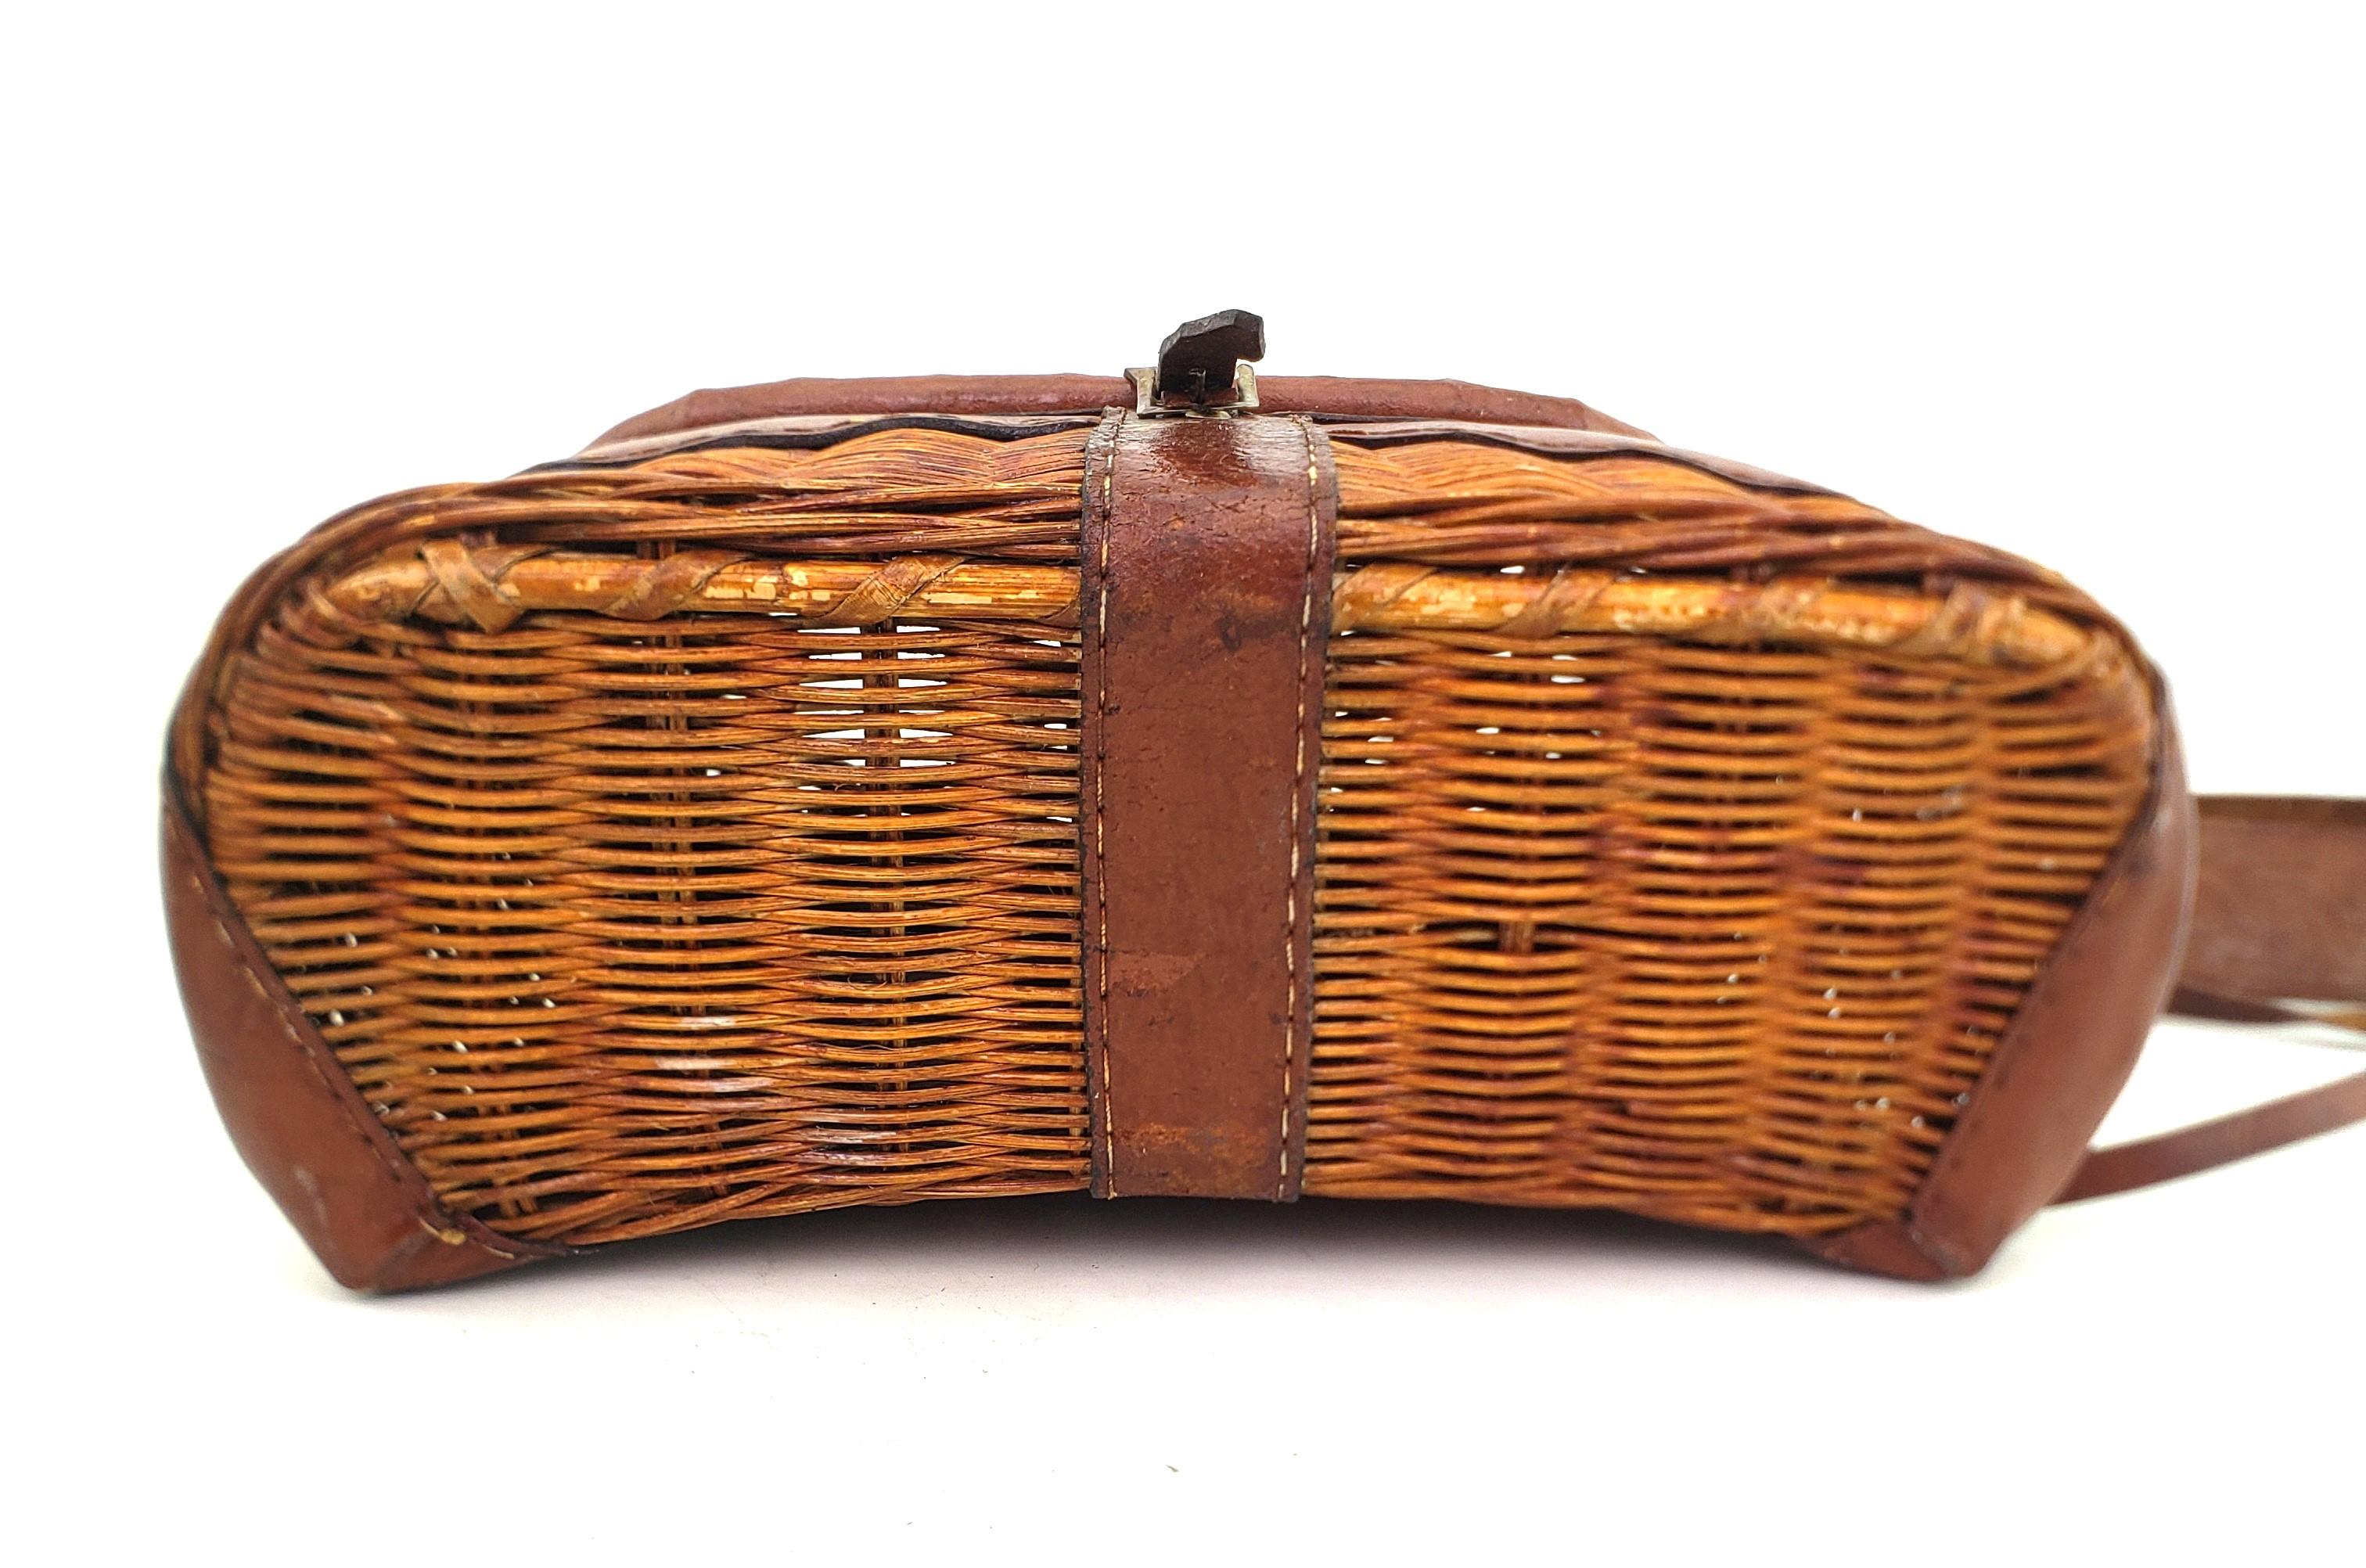 Antique British Hong Kong Wicker & Leather Fishing Creel or Basket with Straps For Sale 5